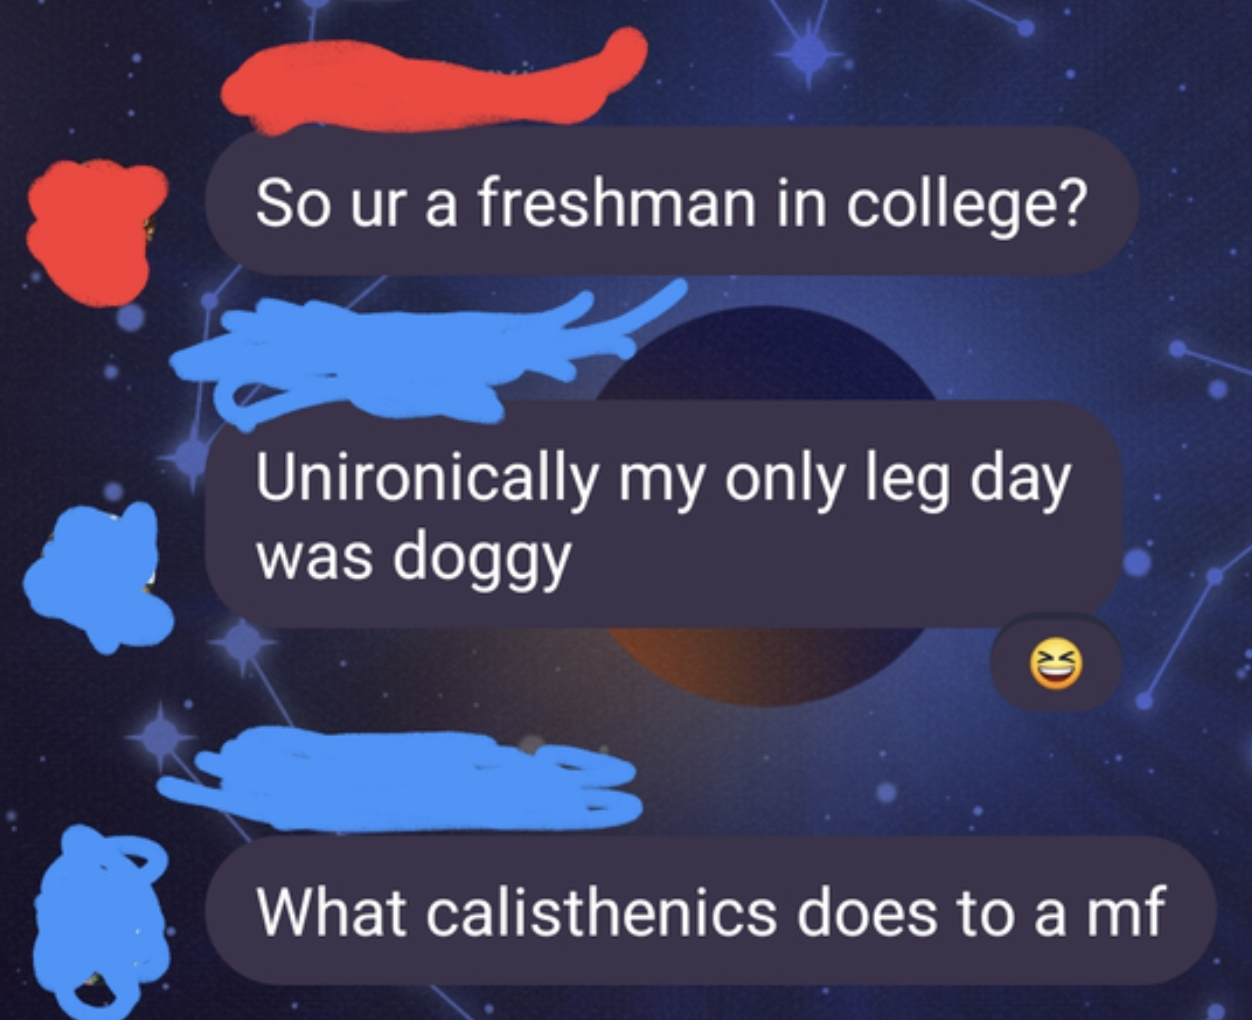 I have sex - atmosphere - So ur a freshman in college? Unironically my only leg day was doggy What calisthenics does to a mf